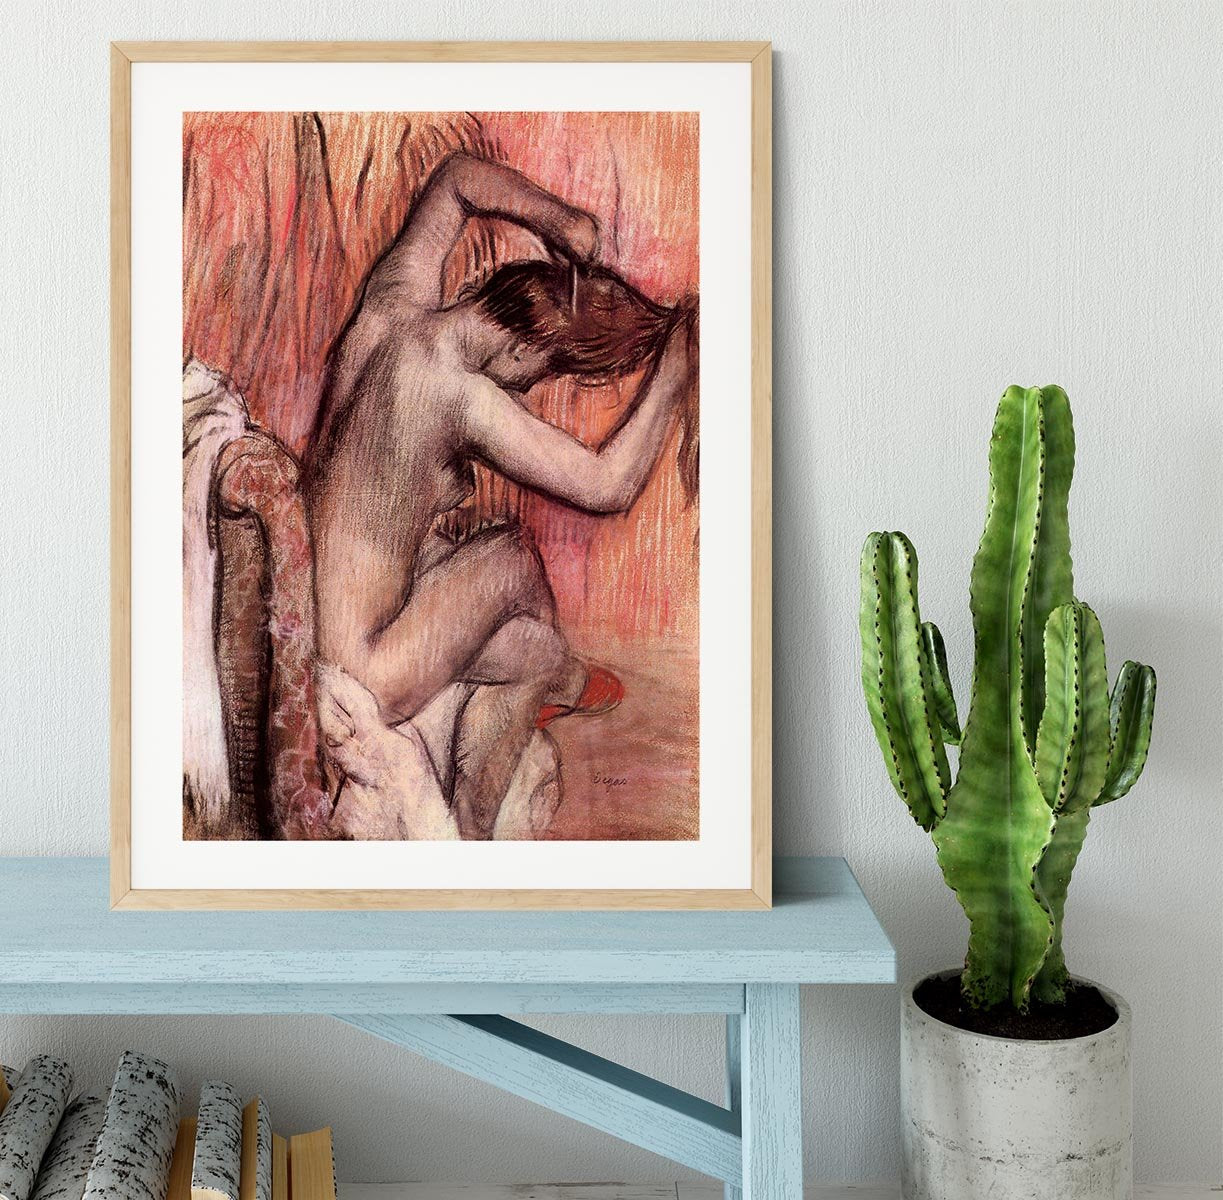 Sitting and brushing by Degas Framed Print - Canvas Art Rocks - 3